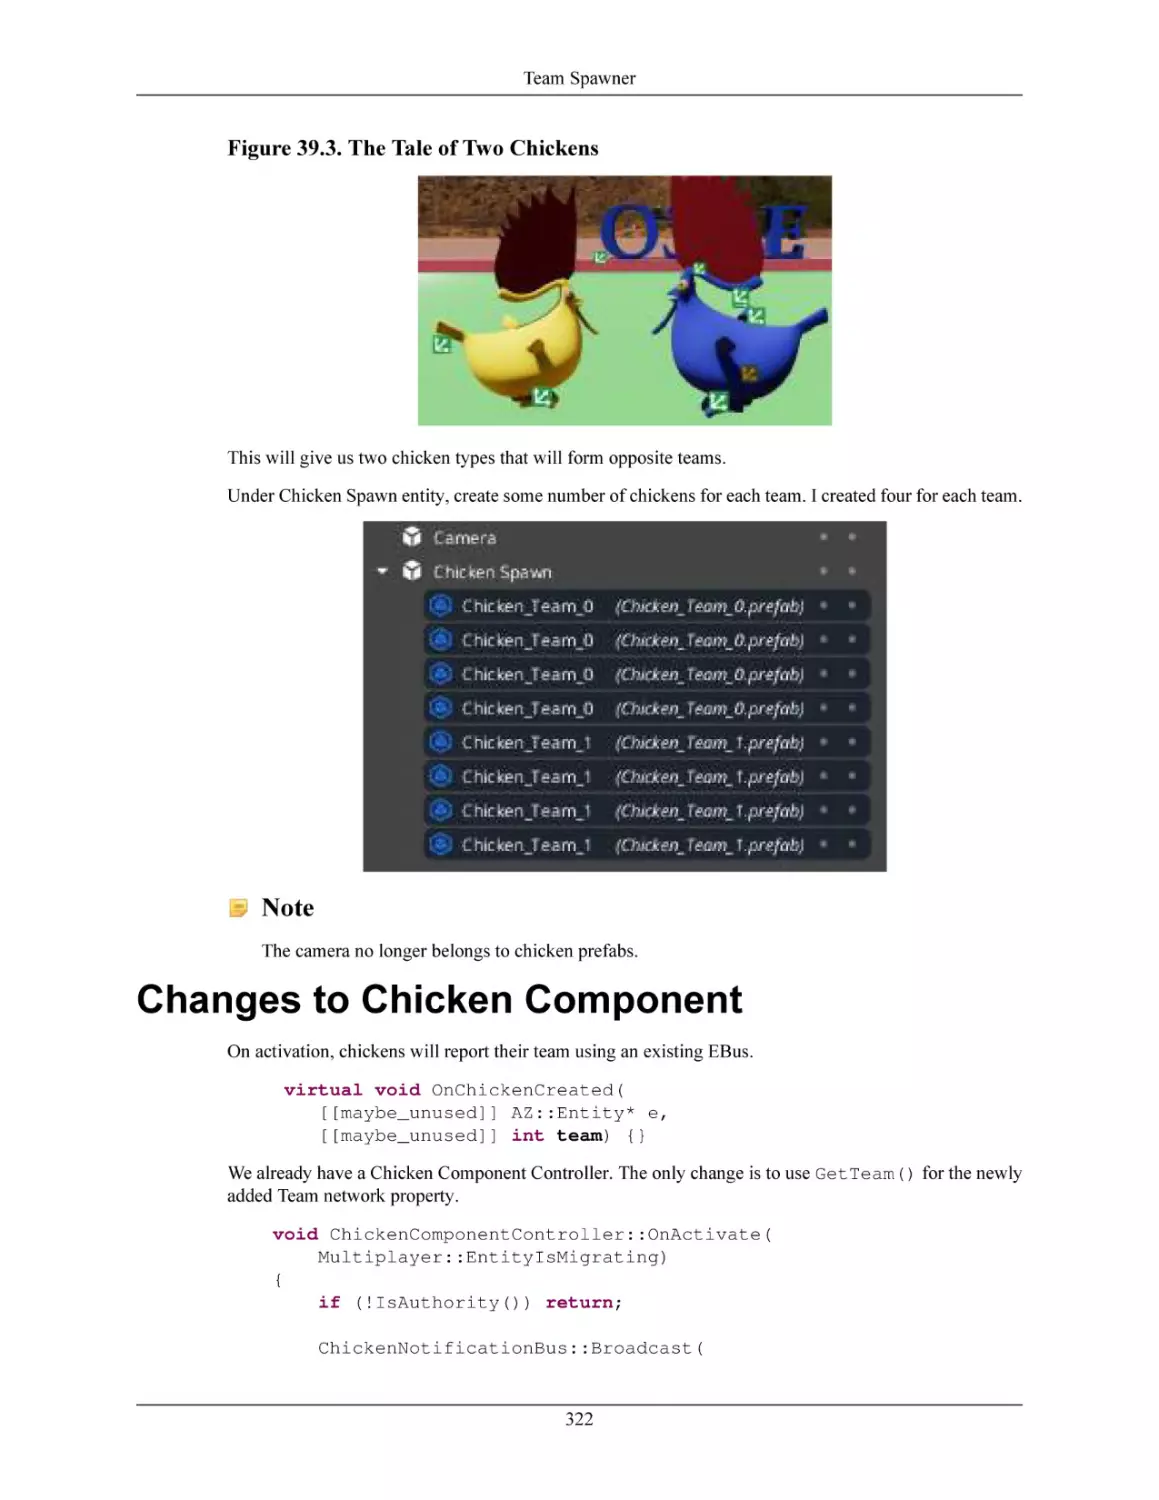 Changes to Chicken Component